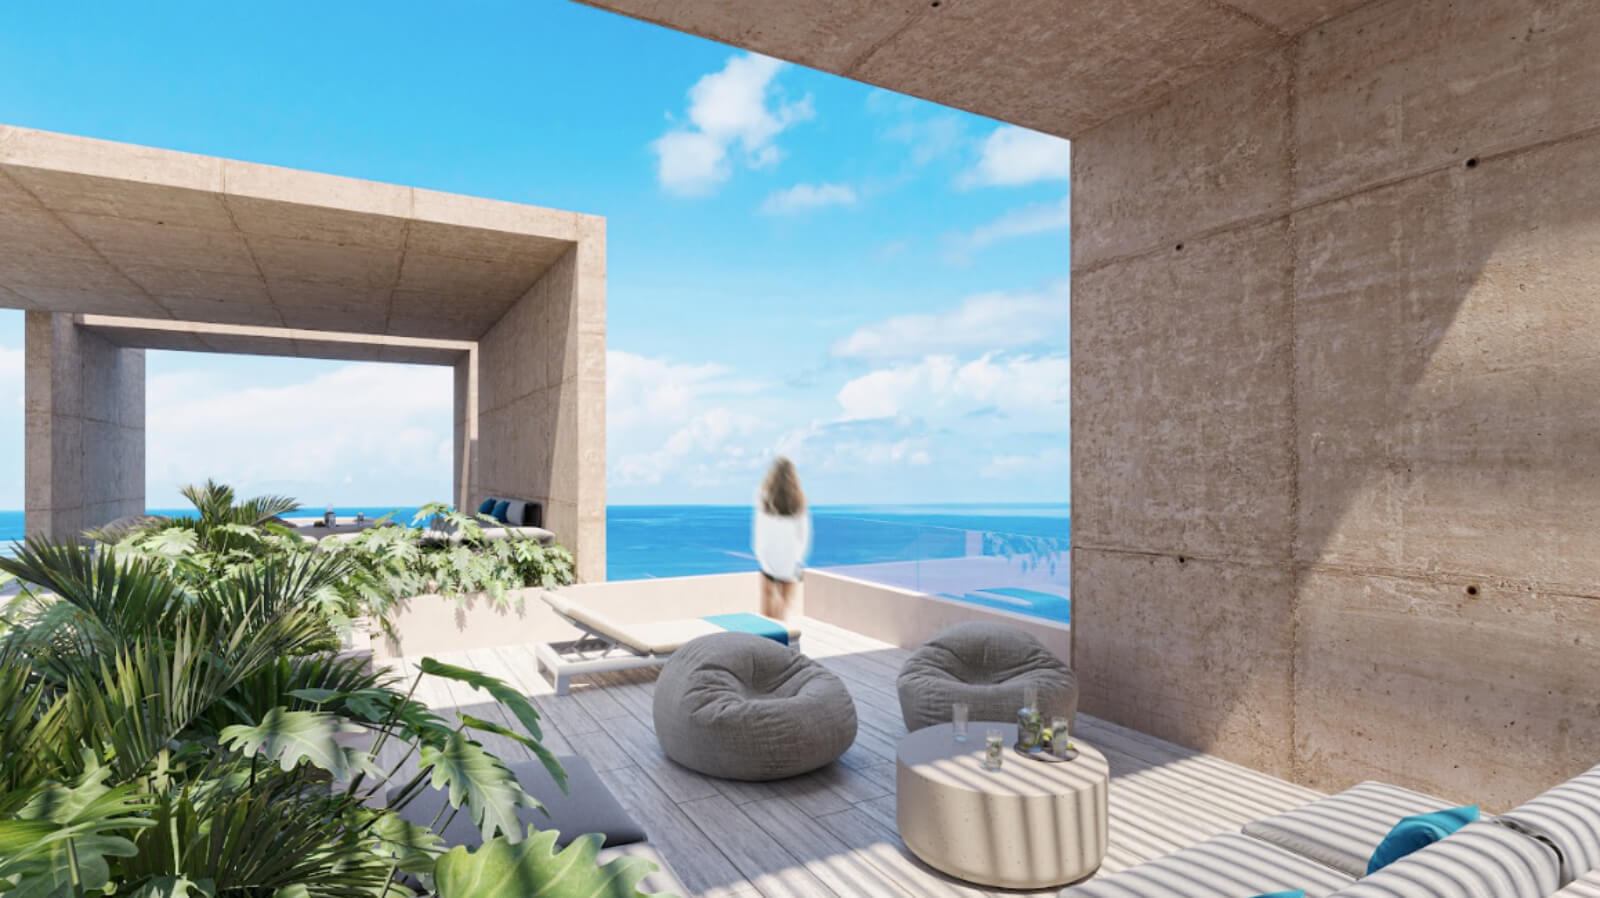 Apartment steps from the sea, with terrace, ocean view pool, 200 meters from the beach, pre-construction, sale Puerto Morelos.